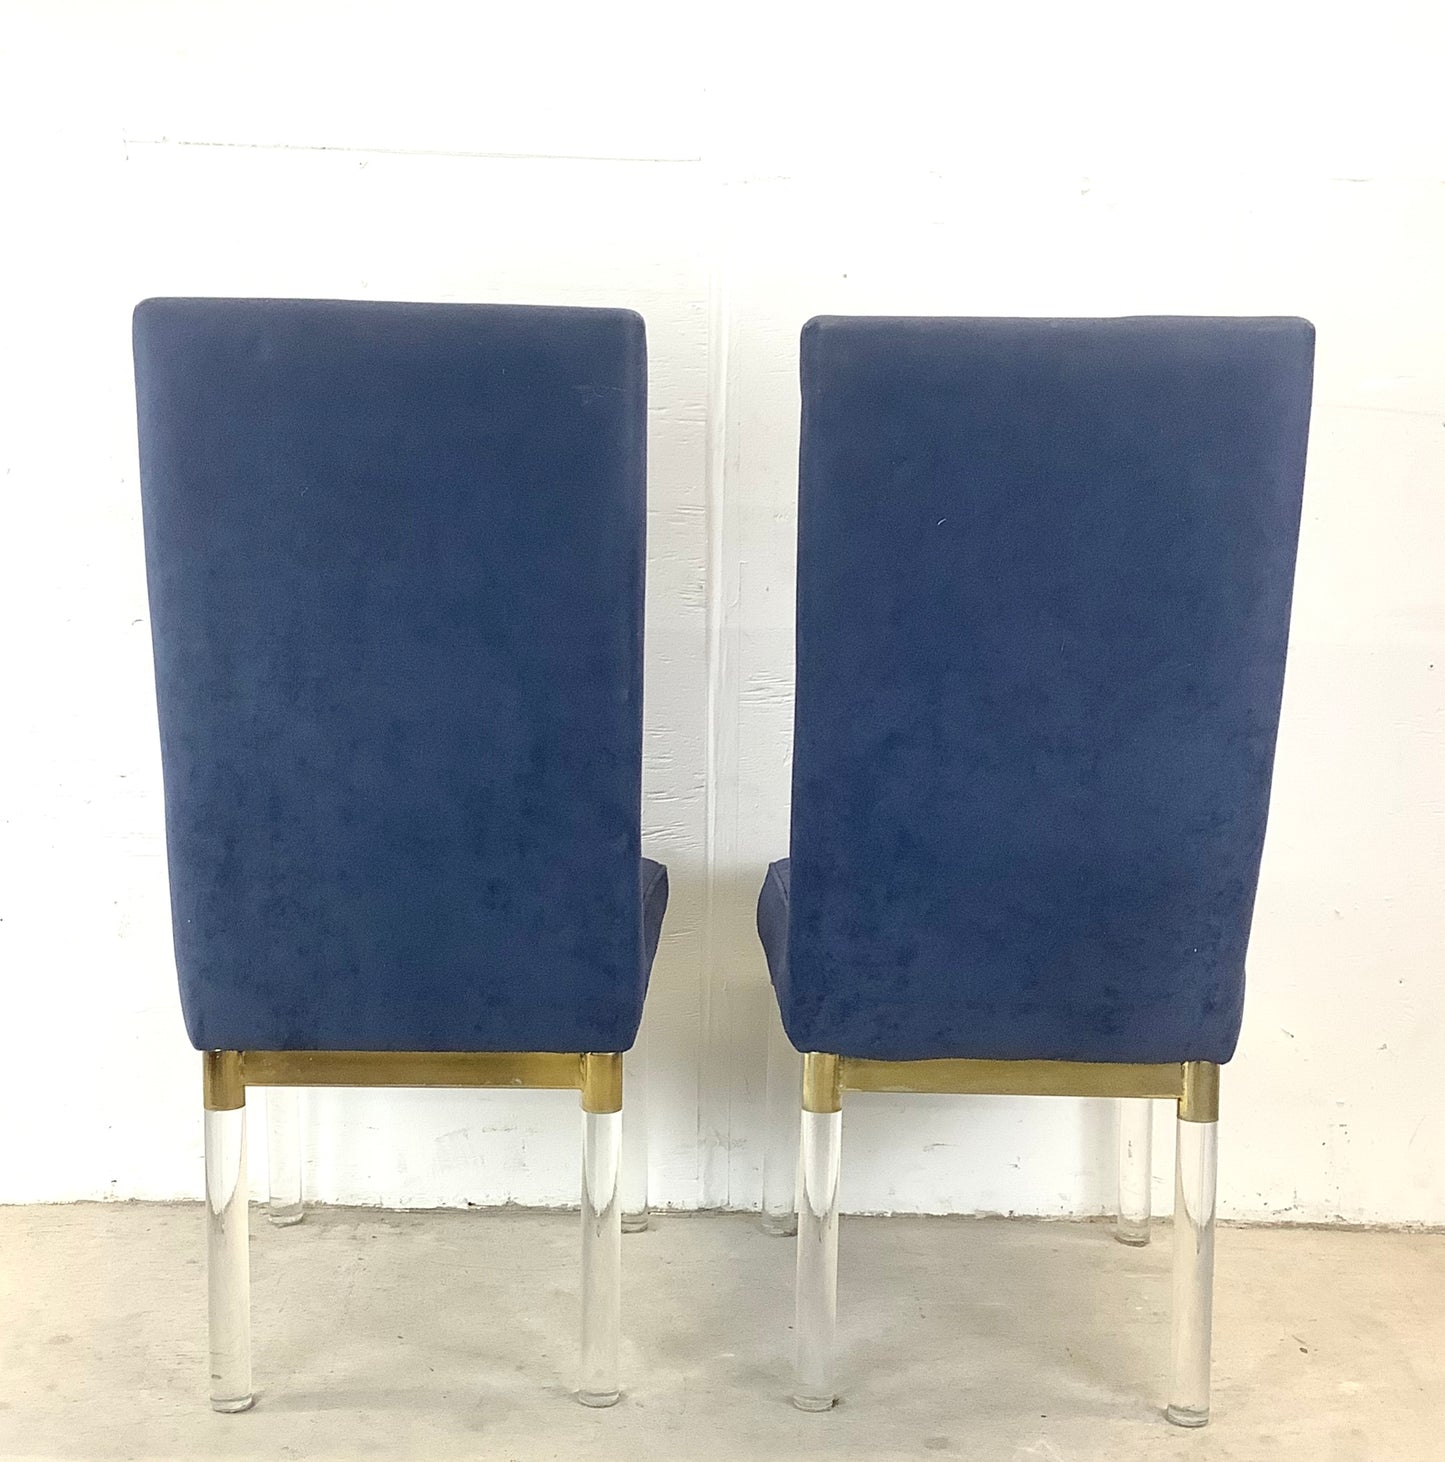 Vintage Modern Dining Chairs w/ Lucite Legs by Charles Hollis Jones- Six